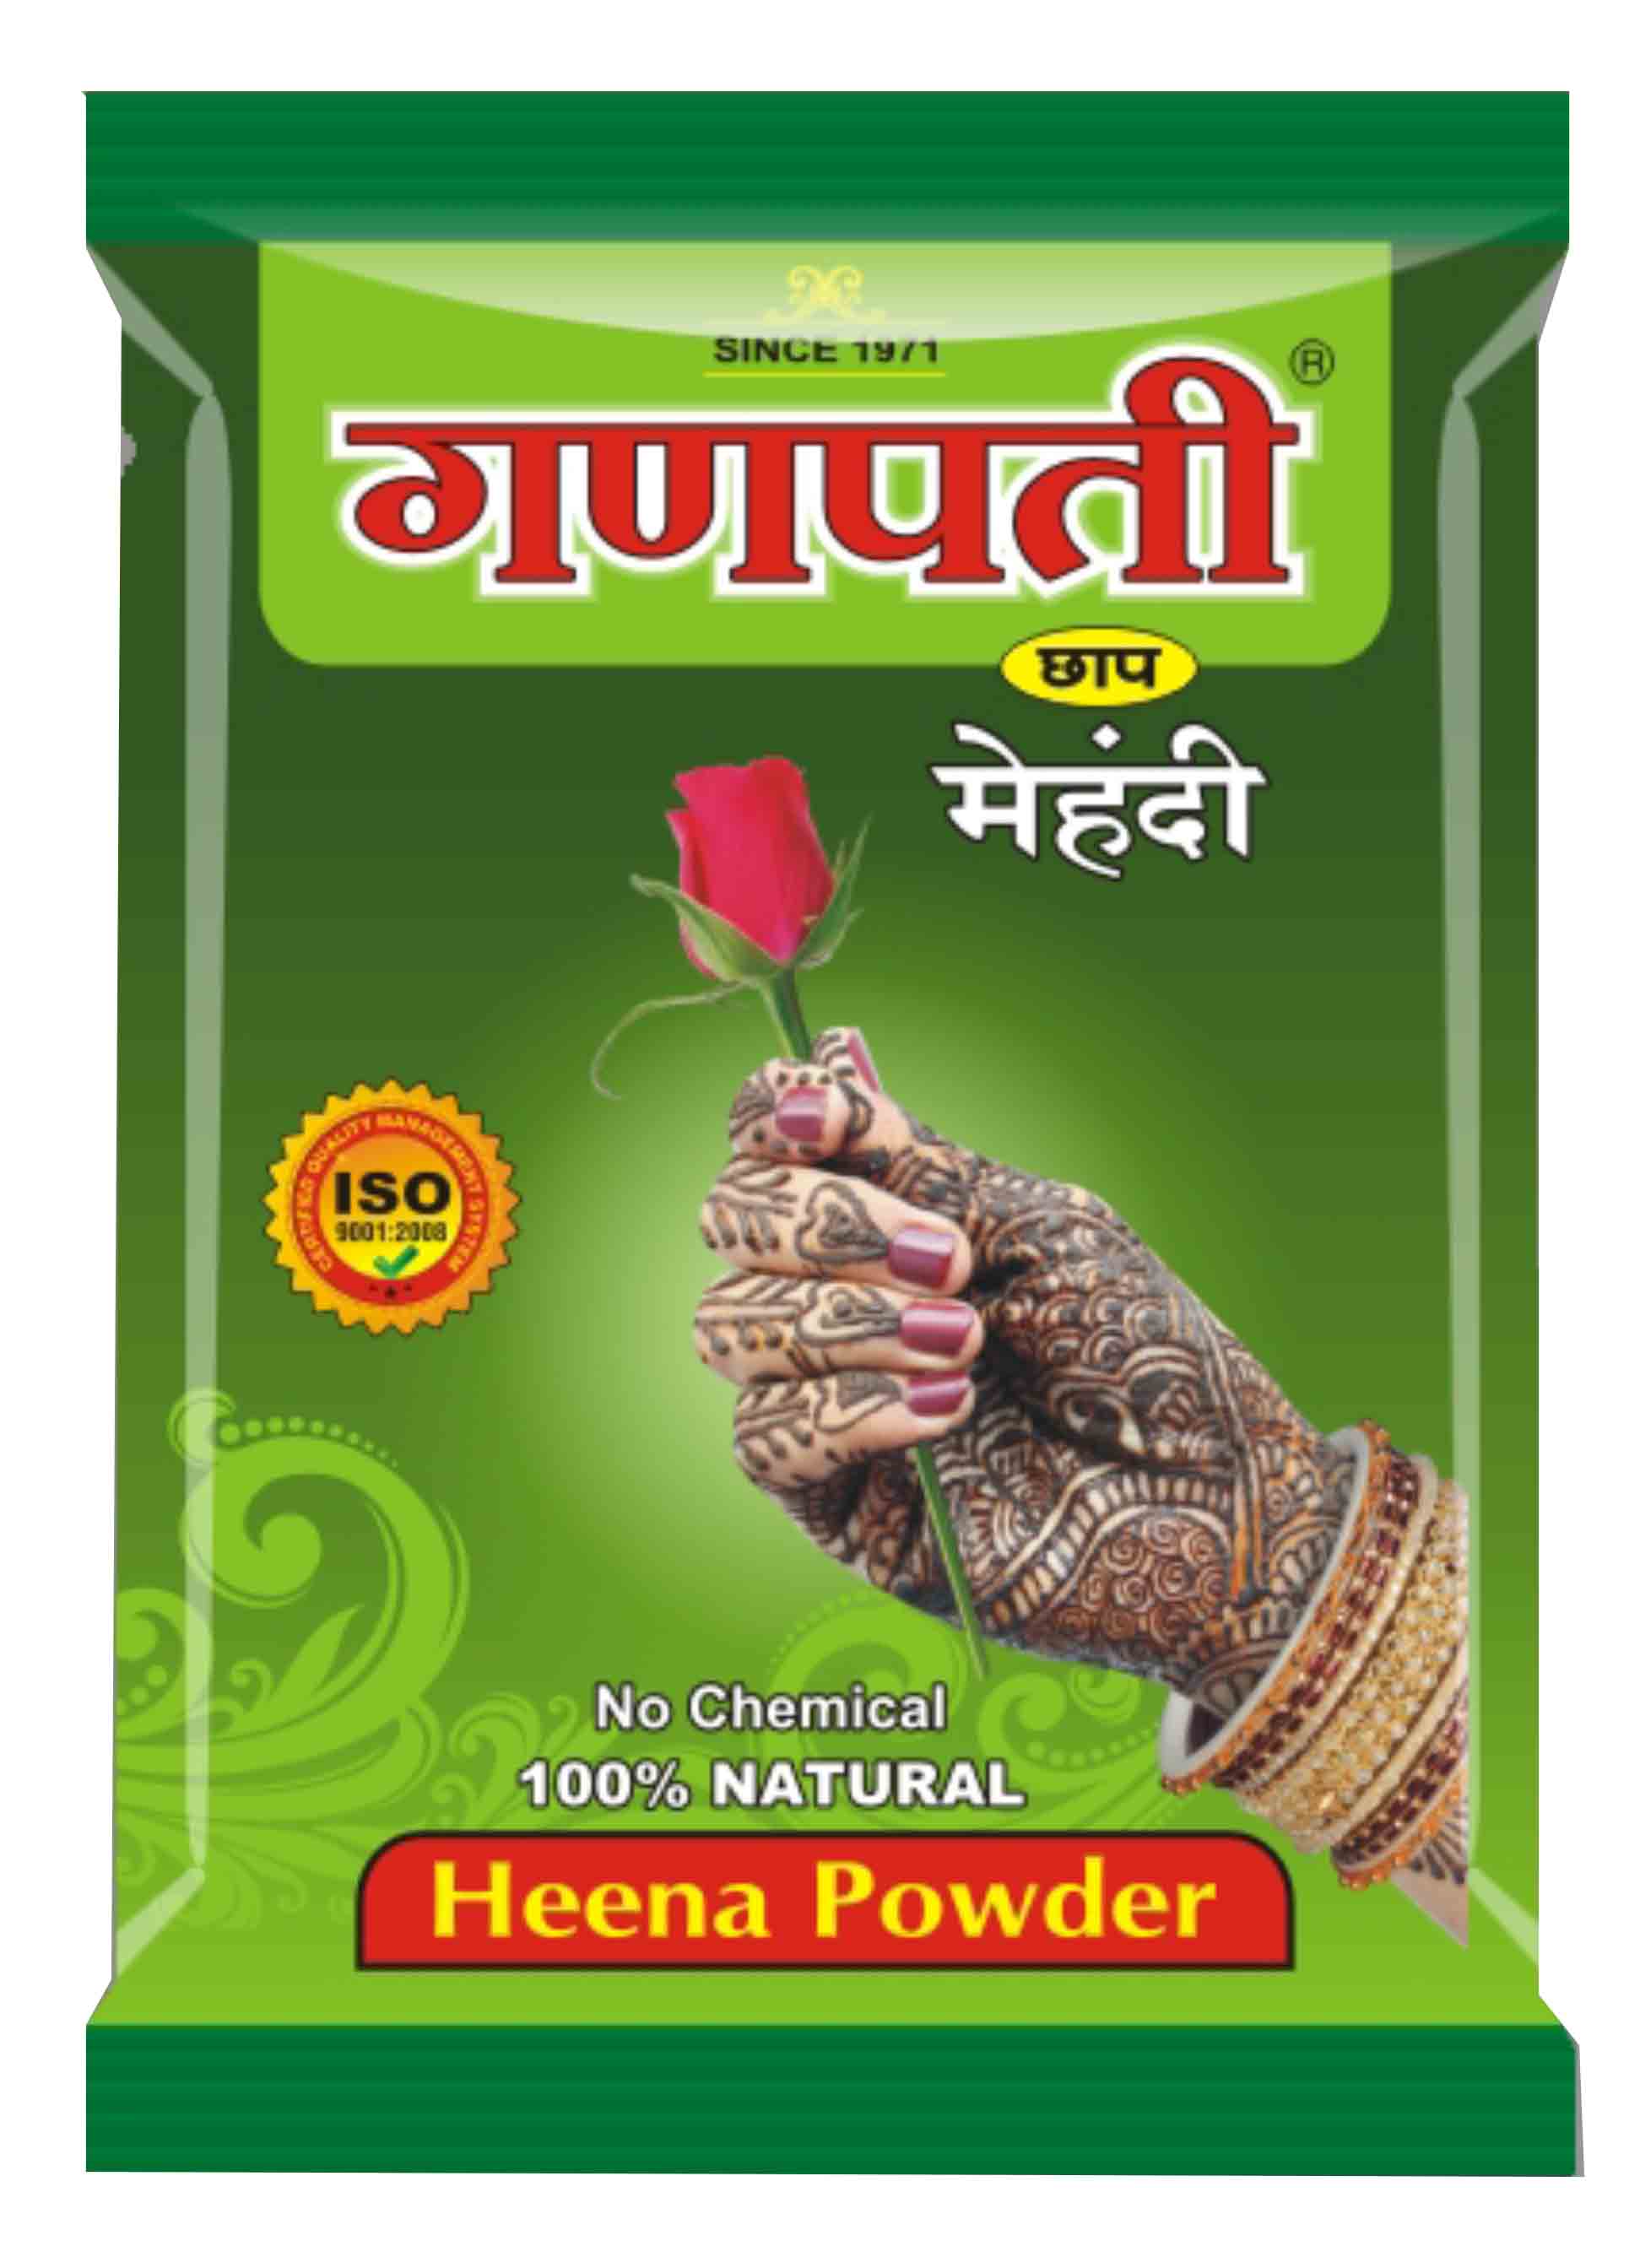 Buy Godrej Nupur 100 Pure HennaMehendi  Natural Conditioning   AntiDandruff Hair Colour Solution Online at Best Price of Rs 20805   bigbasket